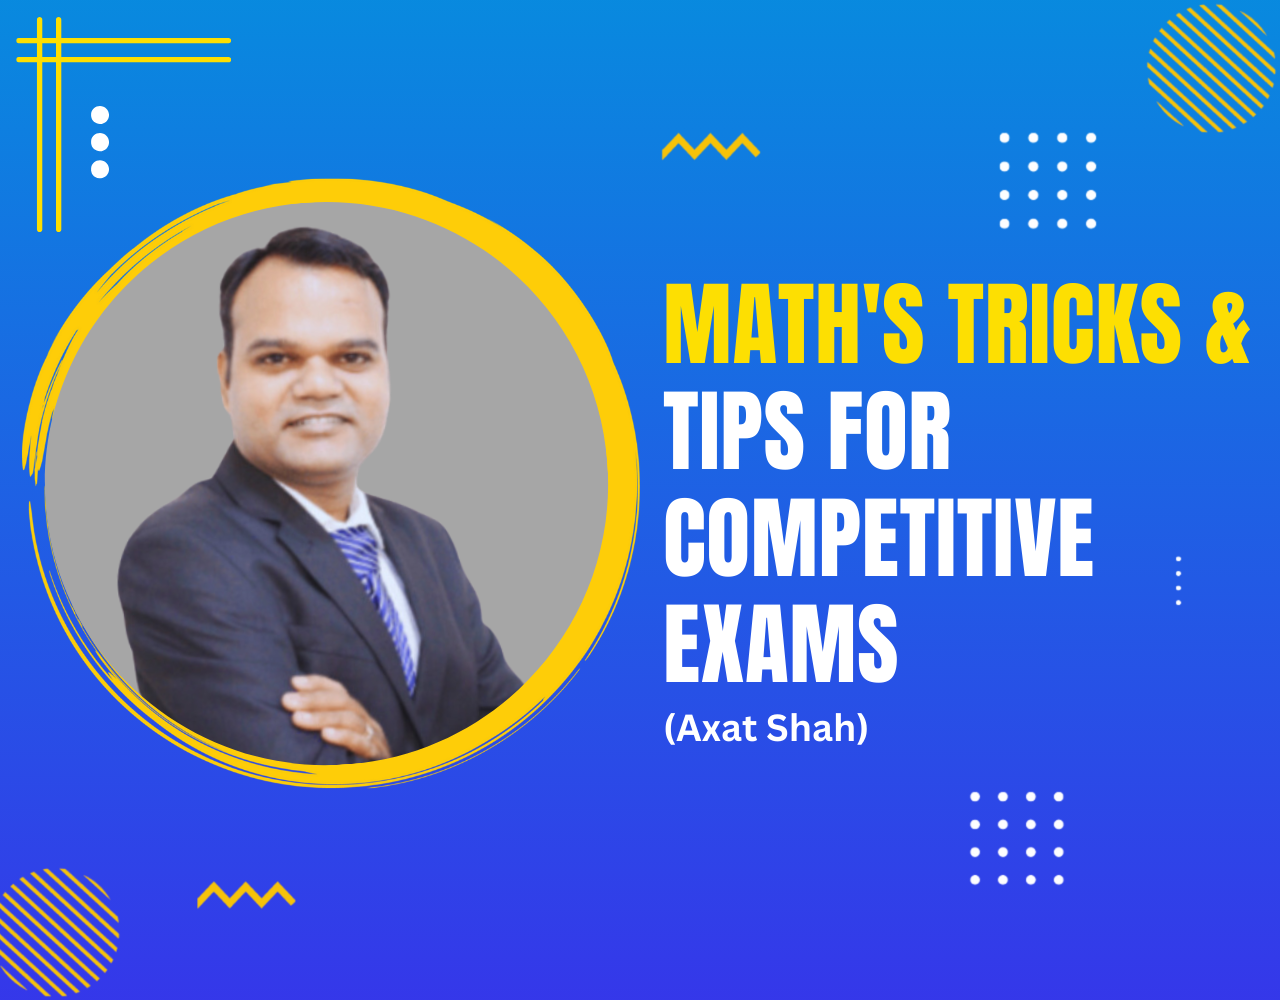 Math's Tricks & Tips for Competitive Exams